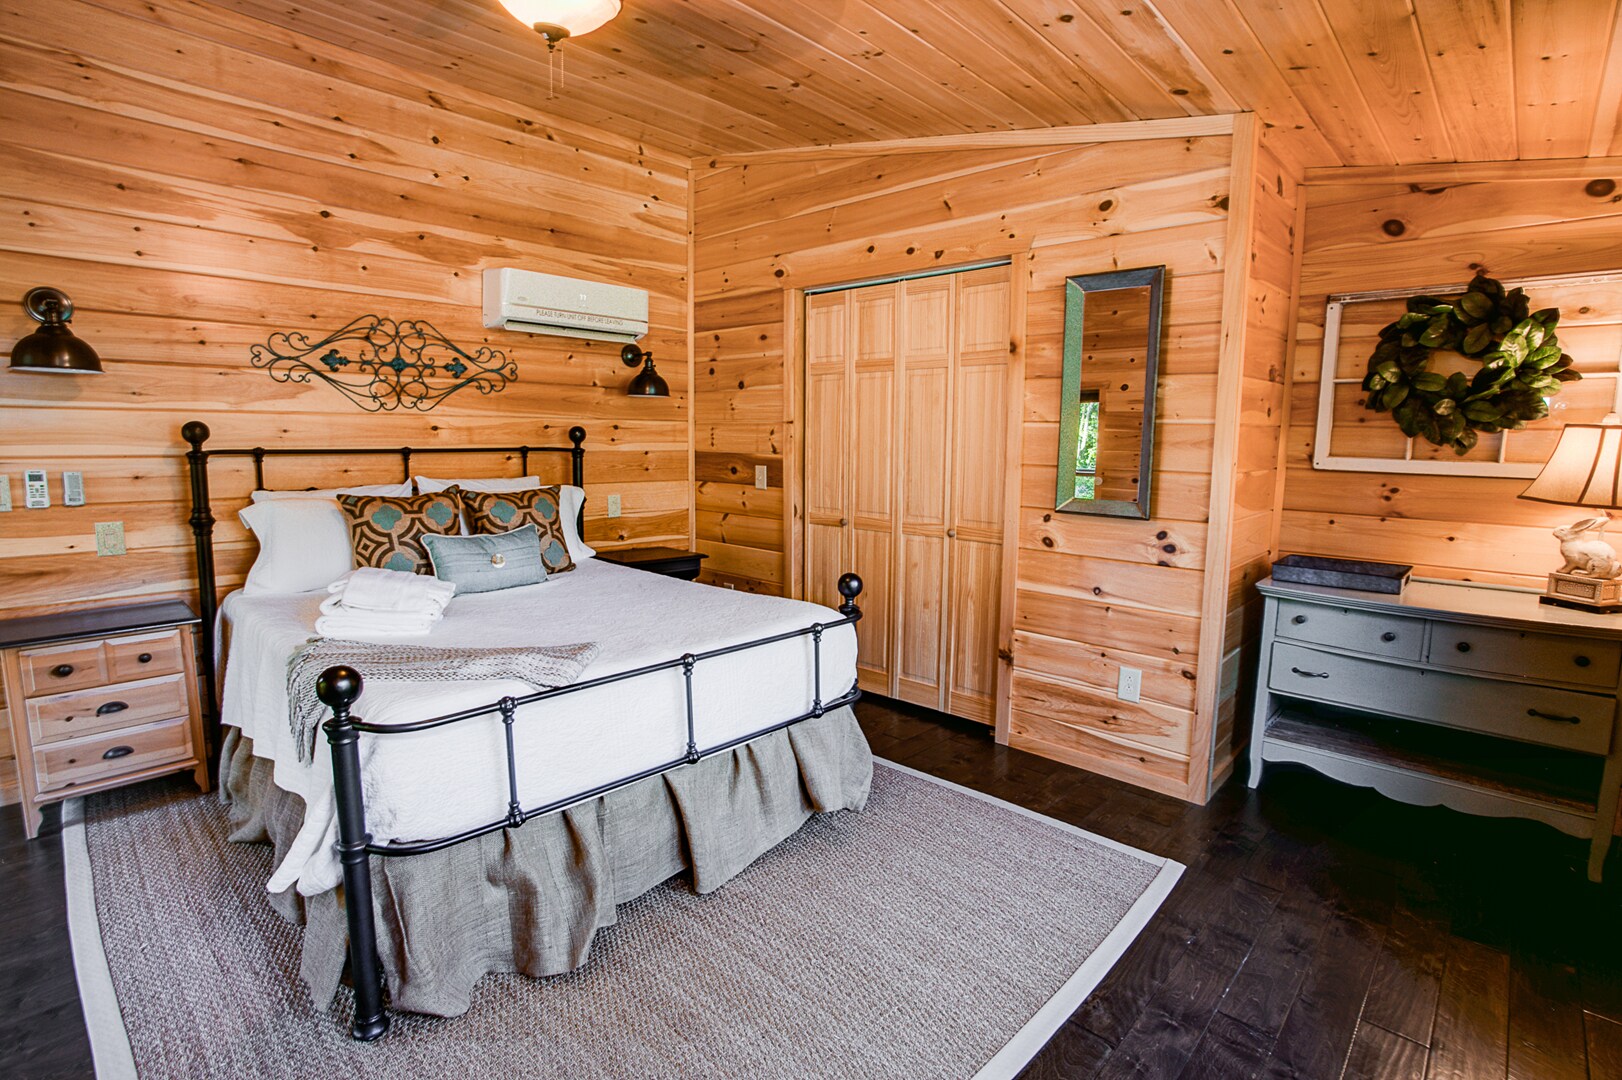 Extraordinary Cabin with Upscale Craftmanship and Unique Amenities